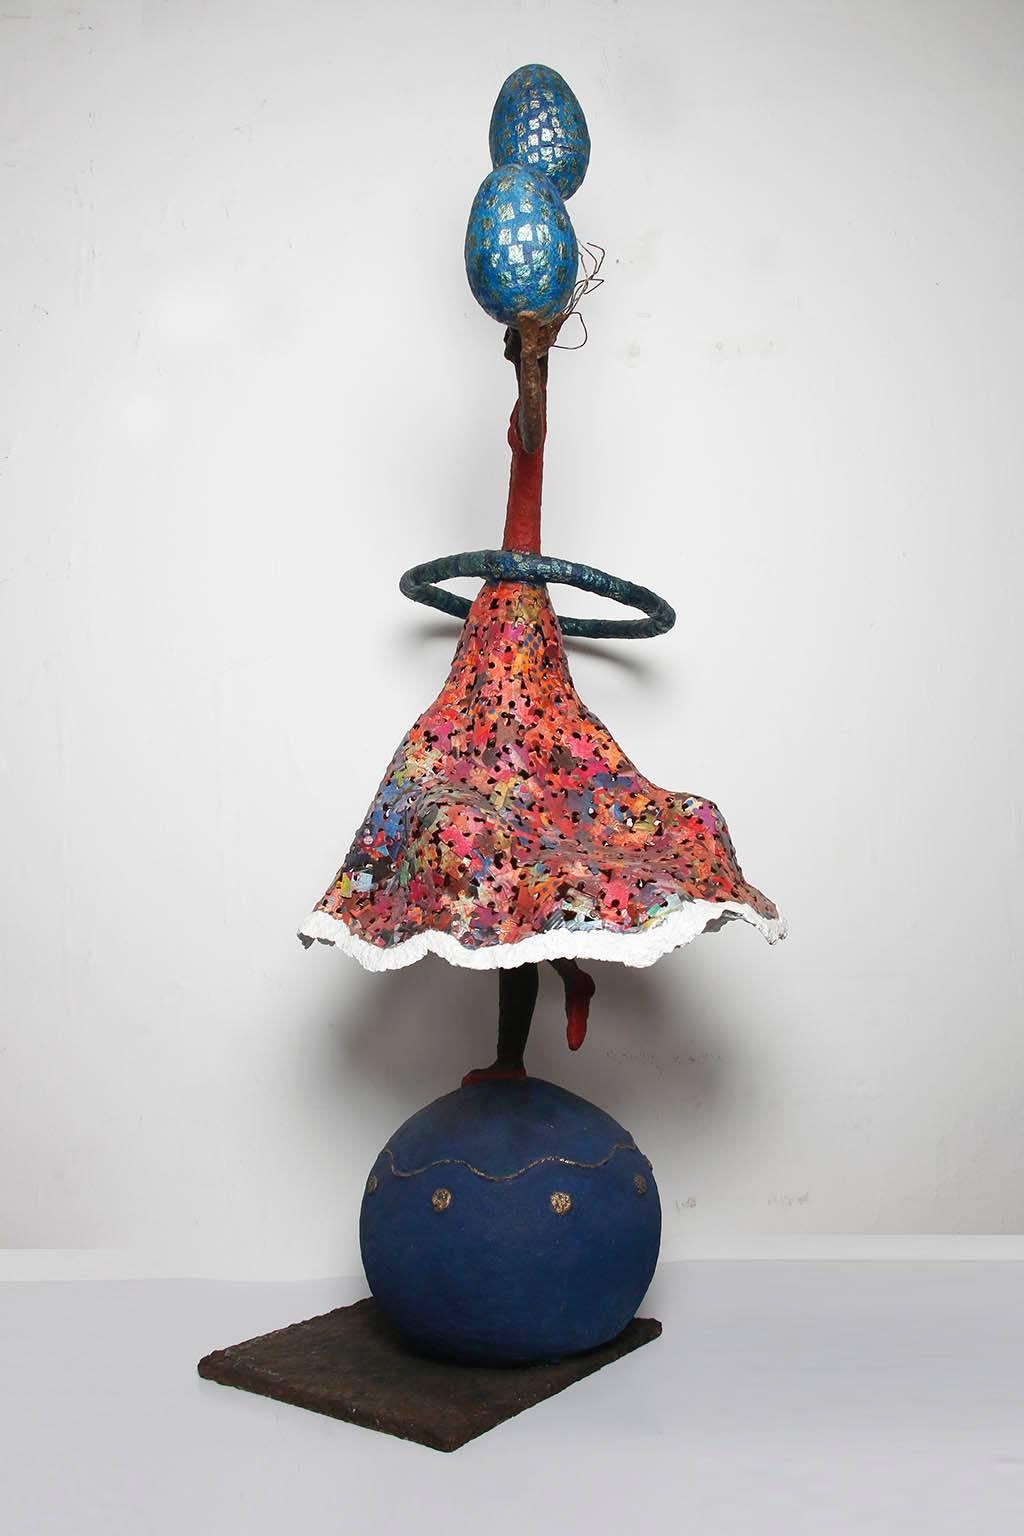 Hand-Crafted 21st Century Blue and Red Sculpture by Mexican Artist Miriam Ladron De Guevara